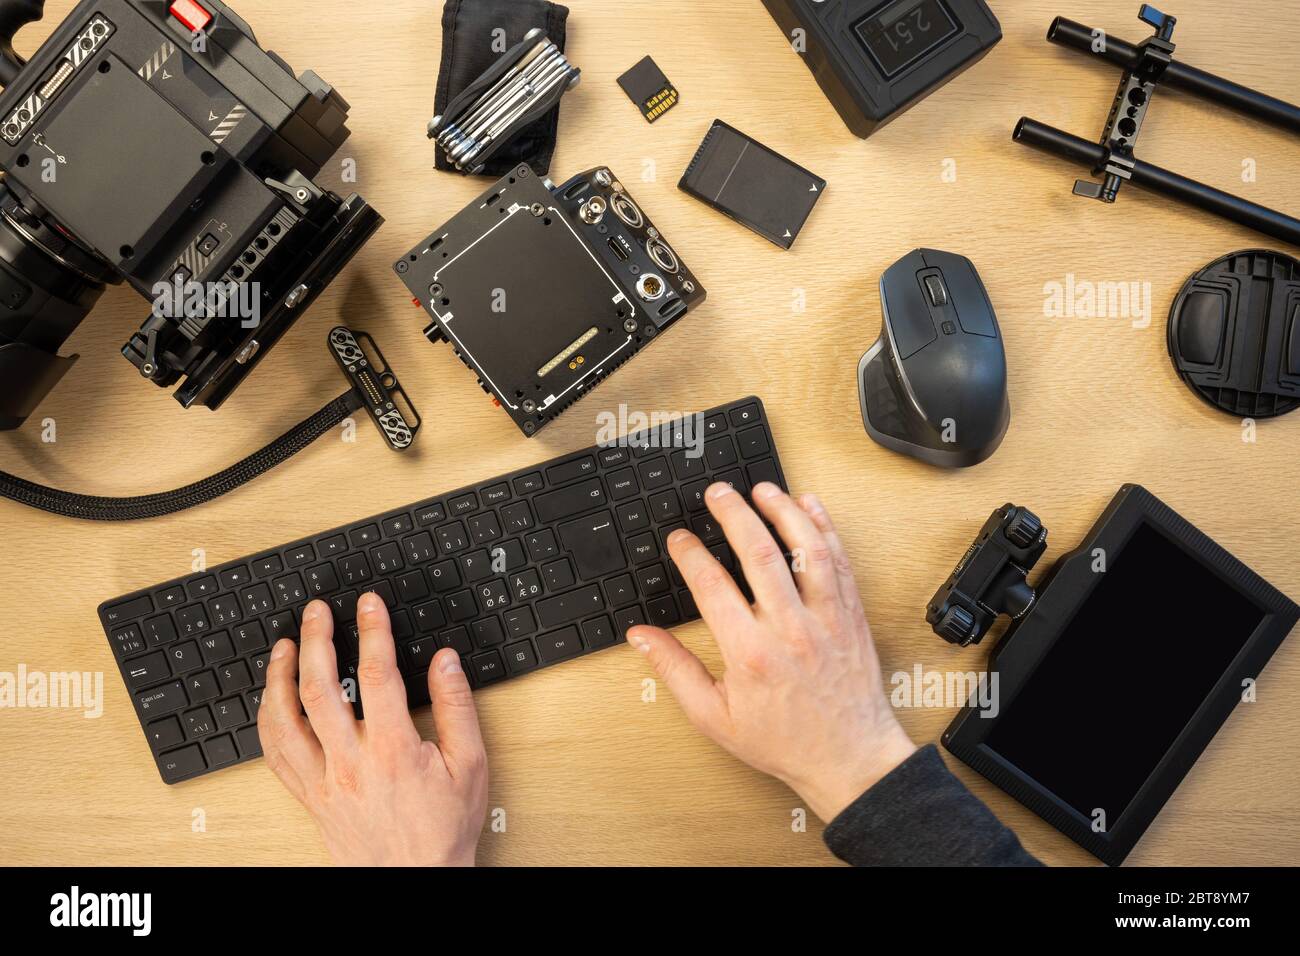 Cropped hands using computer keyboard by various equipment at table Stock Photo